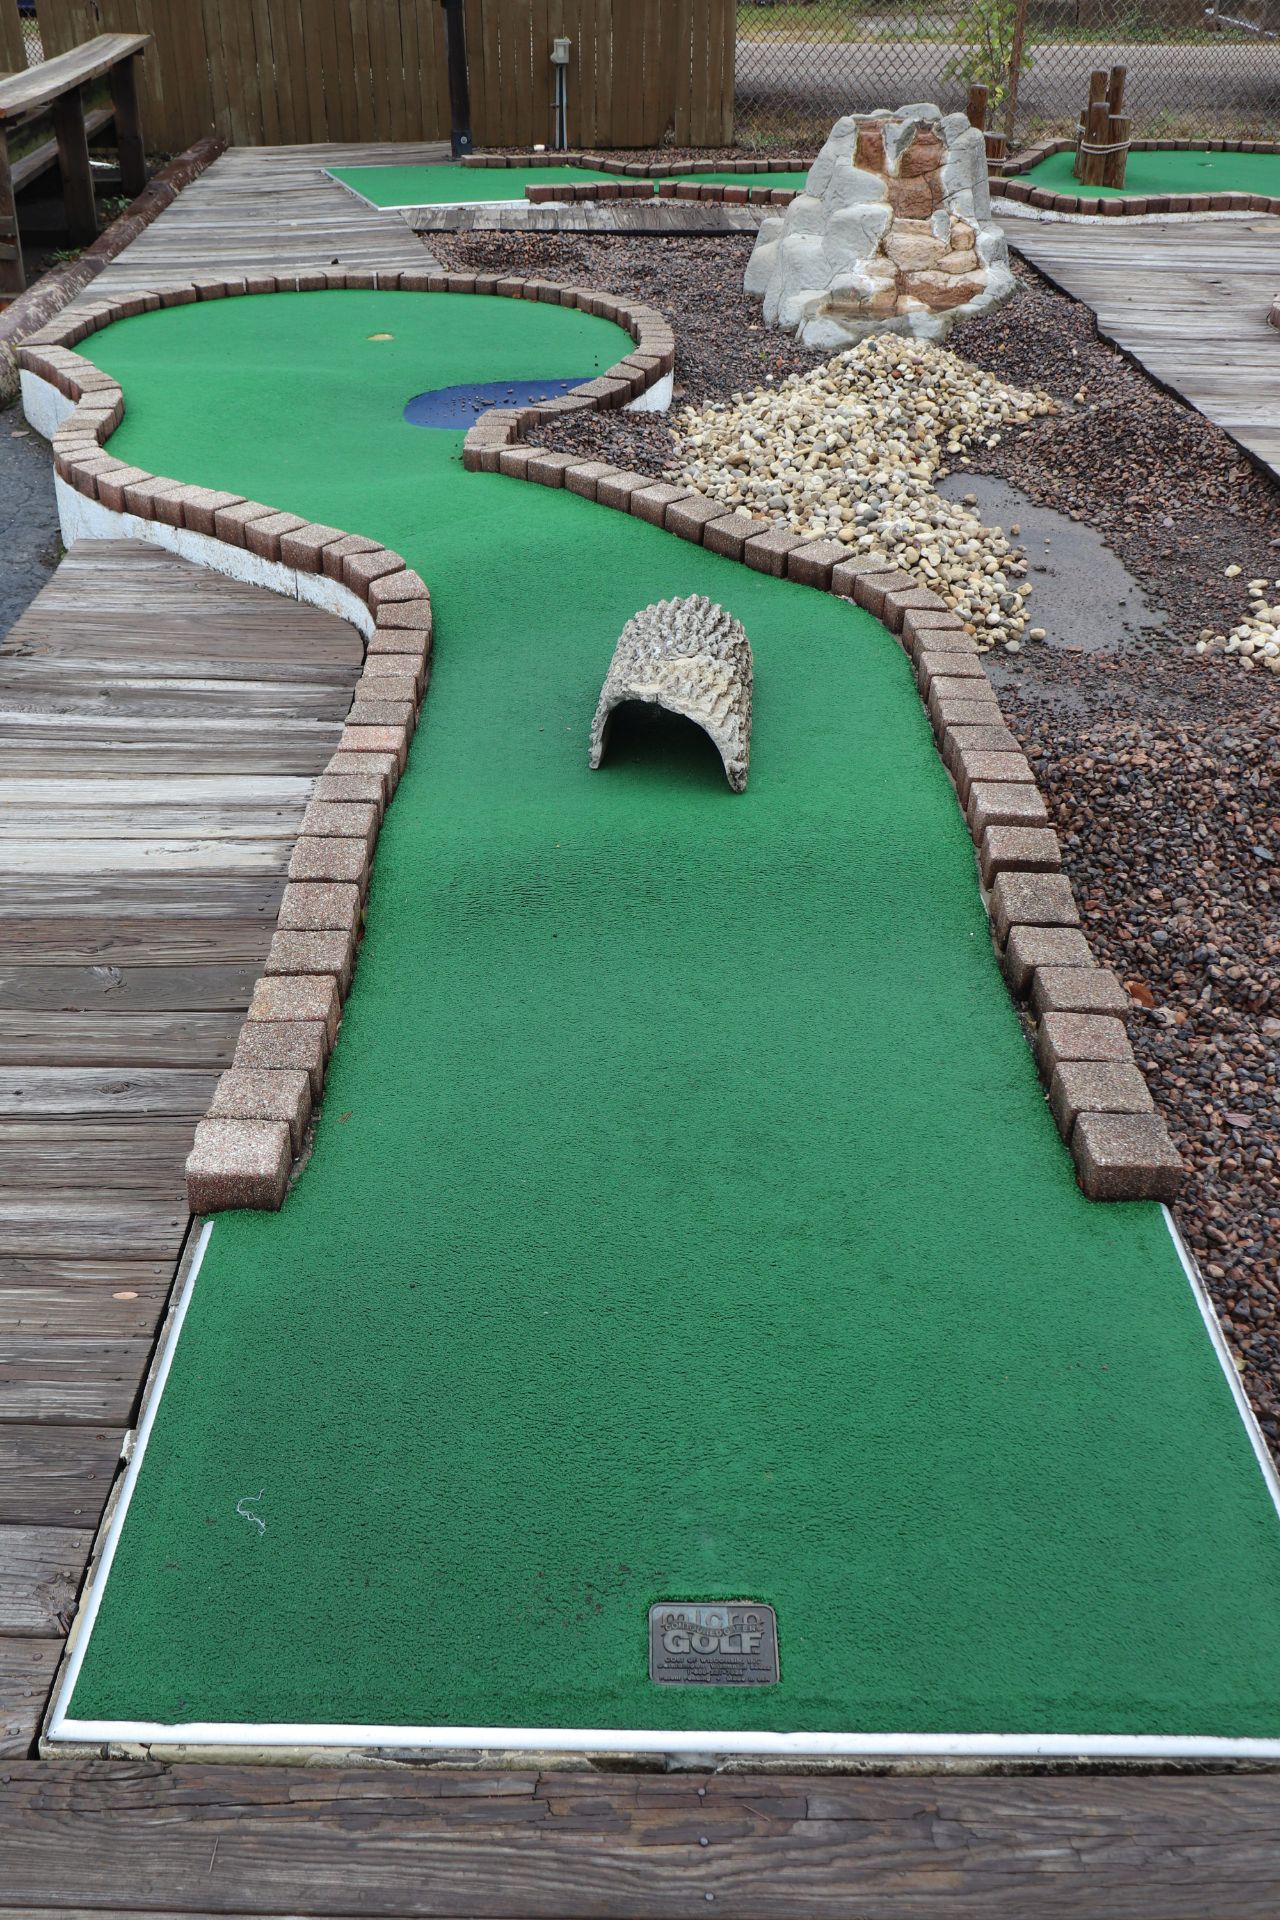 Modular 18-hole mini golf course by Micro Golf Cost of Wisconsin Inc., blueprints provided, carpet p - Image 2 of 9